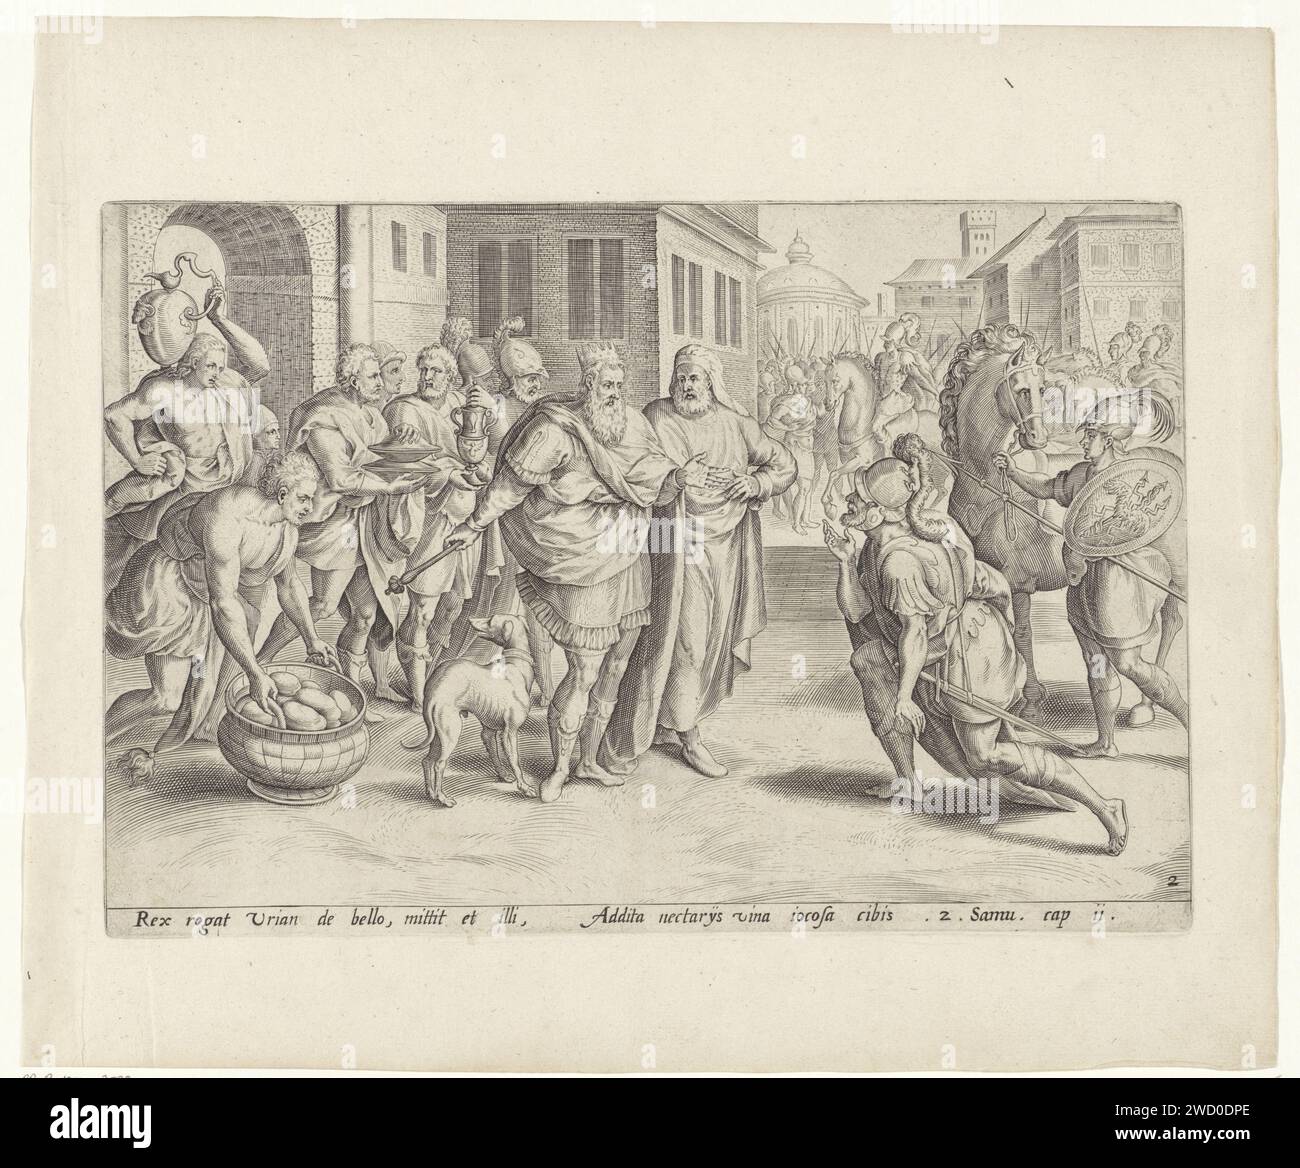 Uria called back by David from the war, Johann Sadeler (I) (Attributed to), after Marten van Cleve (I), 1596 - 1643 print King David has recalled Uria, the man of Batseba, from the war. Uria kneels, dressed in his armor, for him. At Uria, David urges you to relax and to take on the wine and feeds brought by servants. Uria, however, does not go home to sleep with his wife Batseba. Under the show a reference in Latin to the Bible text in 2 SAM. 11. Amsterdam paper engraving David speaks to Uriah. the soldier; the soldier's life Stock Photo